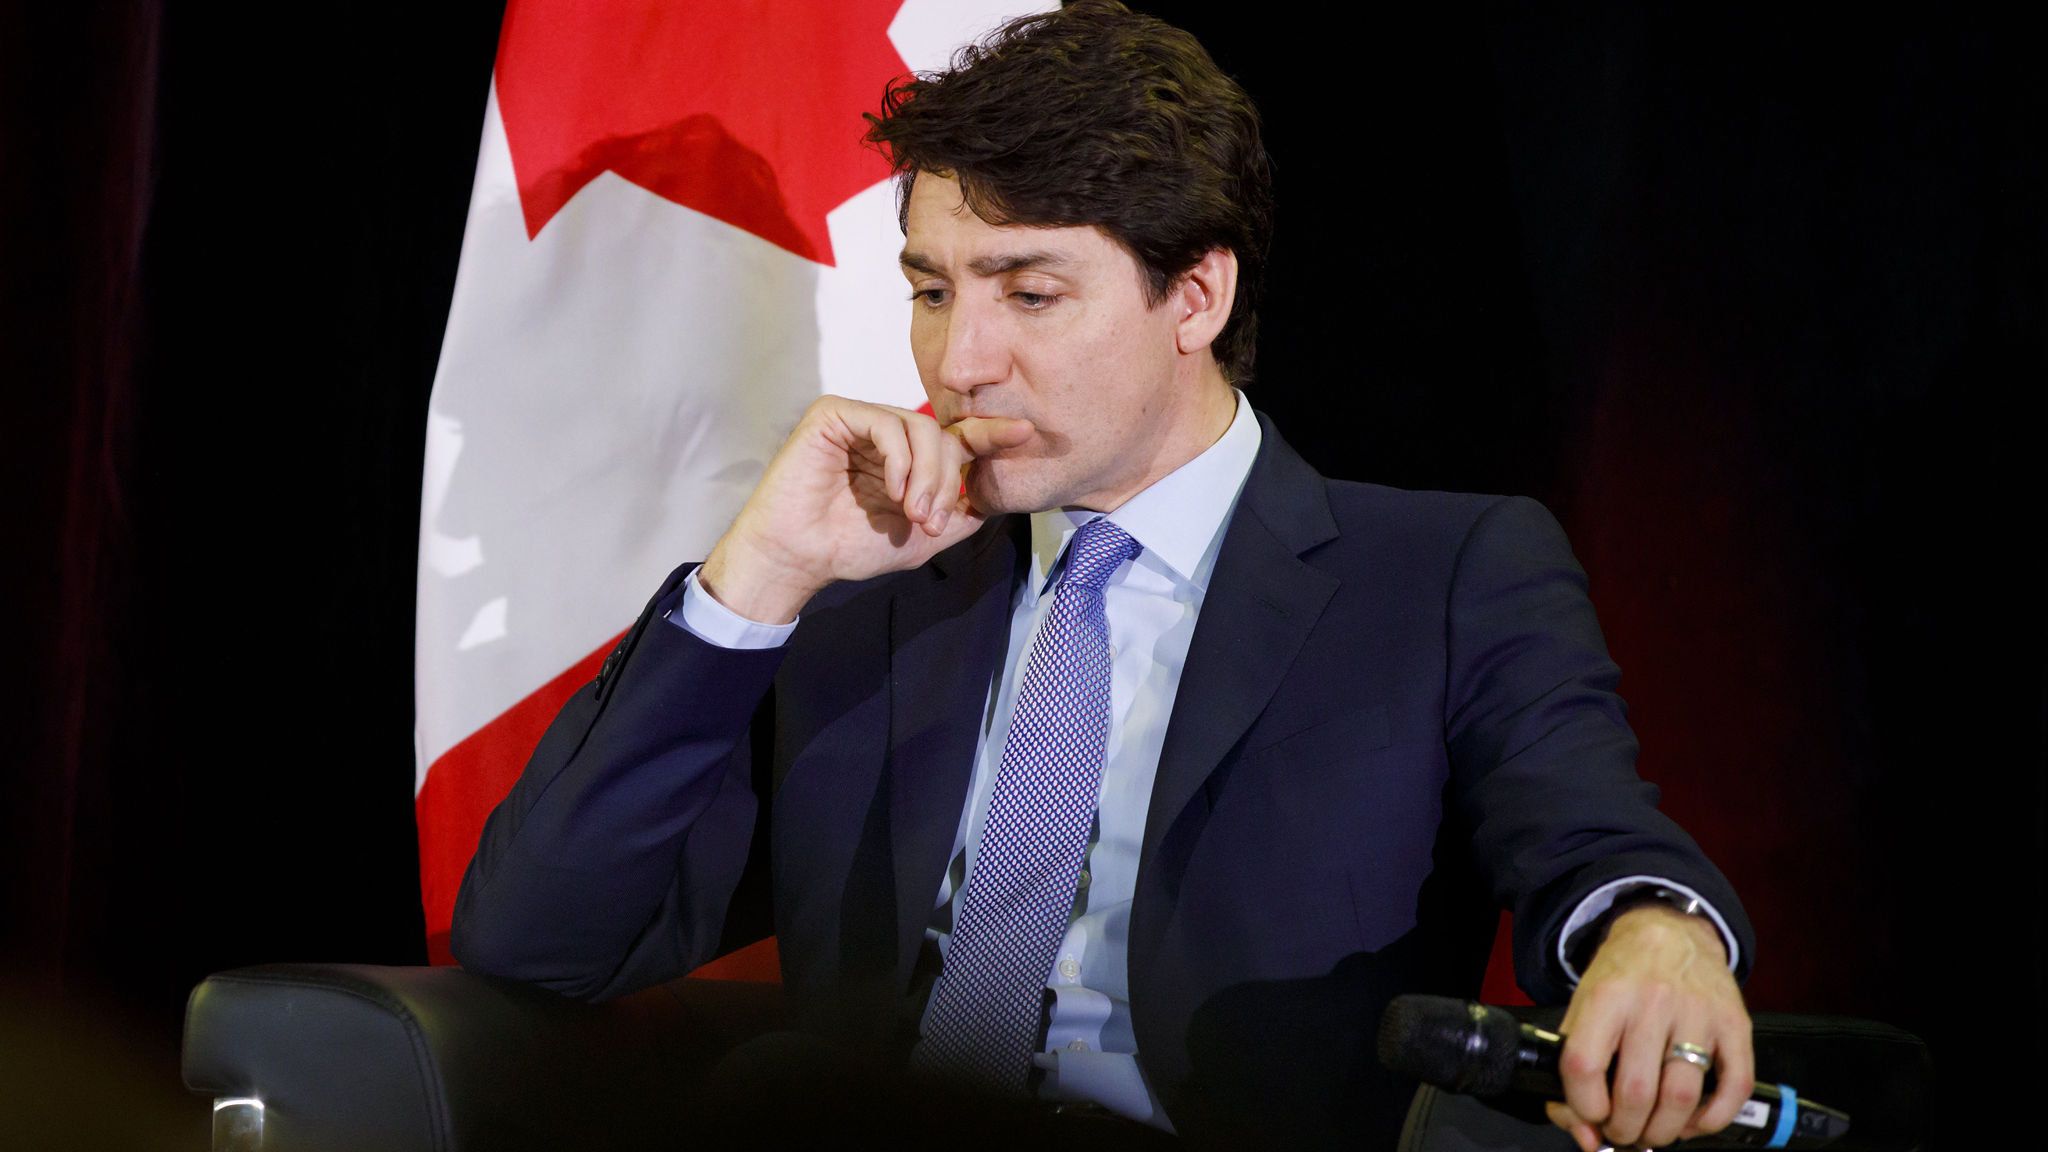 How Canada's Justin Trudeau fell off his moral high horse